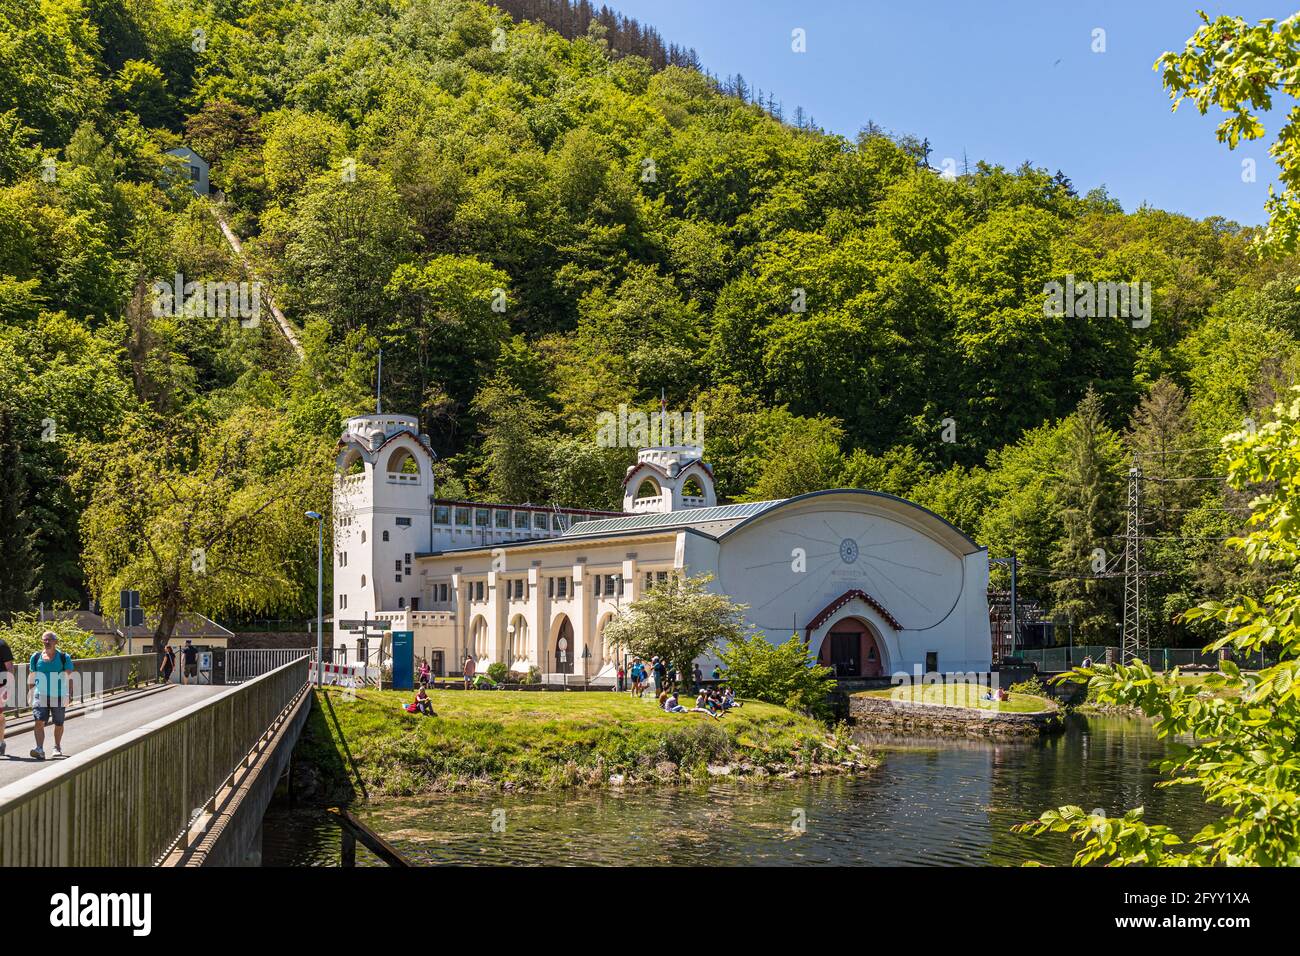 Heimbach art nouveau hydroelectric power station. Heimbach, Germany Stock Photo